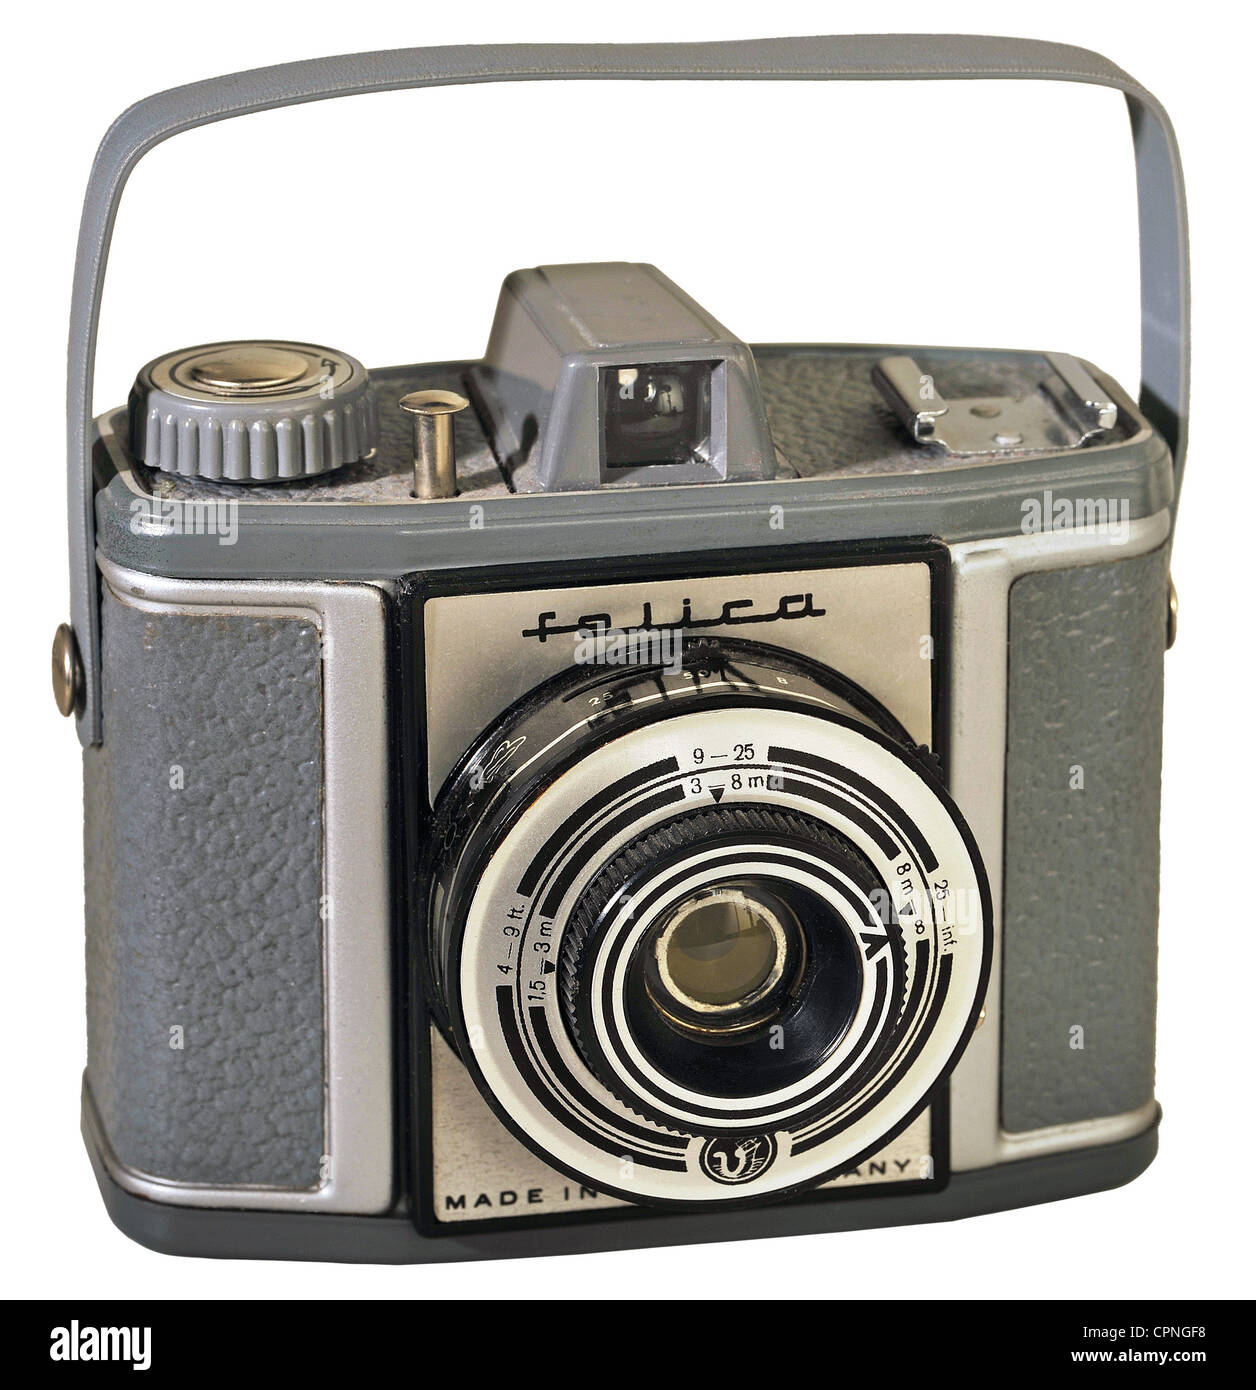 photography, camera, photo camera 'felica', made by: Vredeborch, Nordenham, 3 exposure times possible: 1/25 sec, 1/50 sec and B, Meniscus lens with aperture 8, Germany, 1954, Additional-Rights-Clearences-Not Available Stock Photo